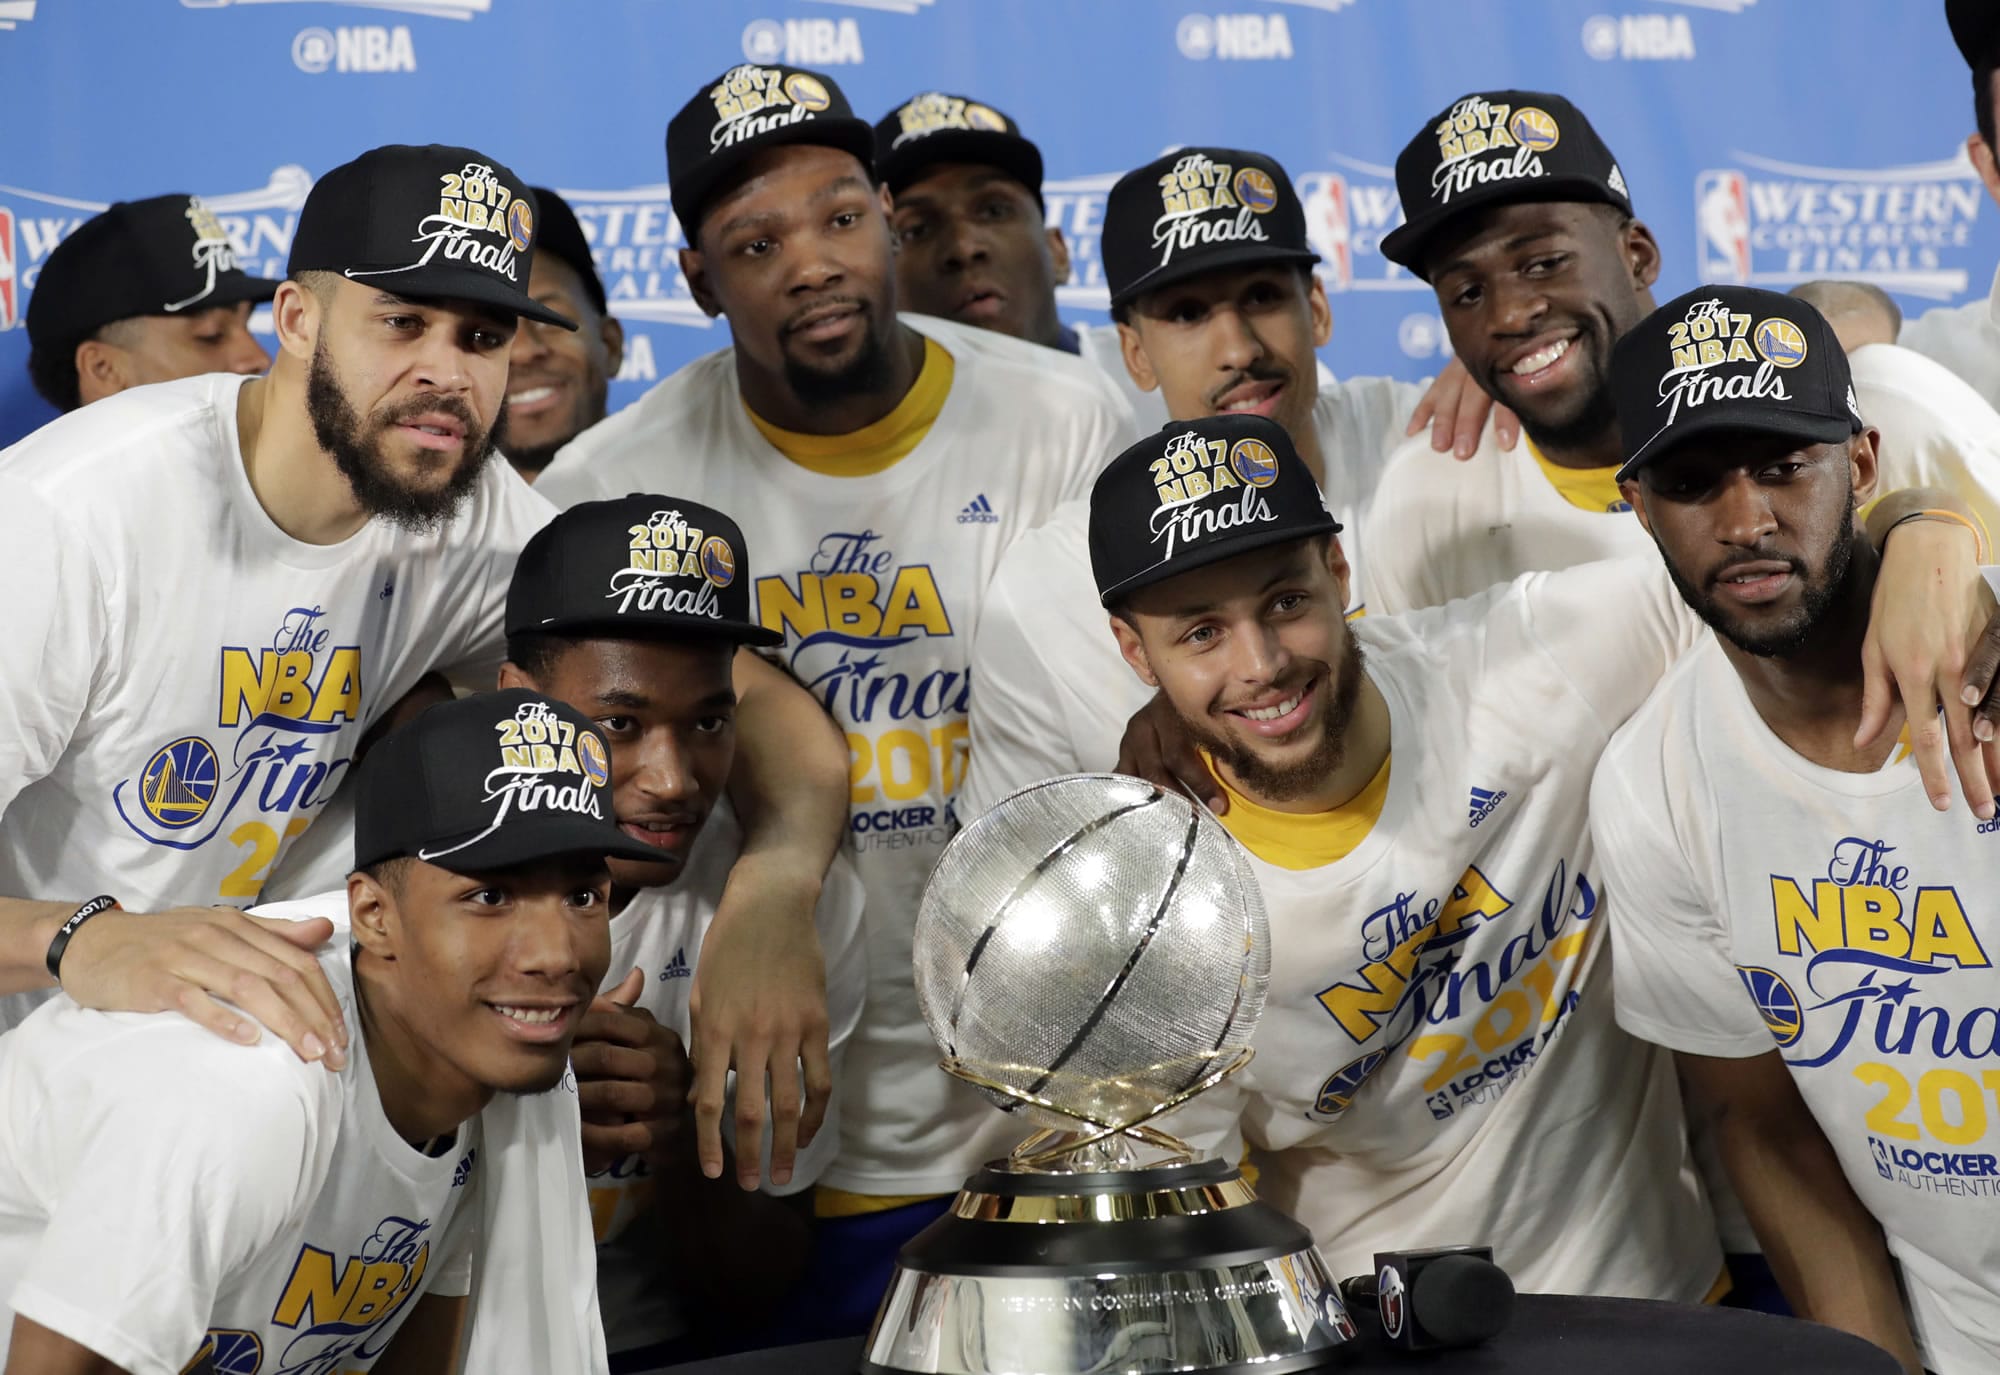 Golden State Warriors' JaVale McGee, top left, Kevin Durant, top center, Stephen Curry, center right, and Draymond Green, top right, join the rest of their team as they pose with the trophy after their 129-115 win over the San Antonio Spurs in Game 4 of the NBA basketball Western Conference finals, Monday, May 22, 2017, in San Antonio.